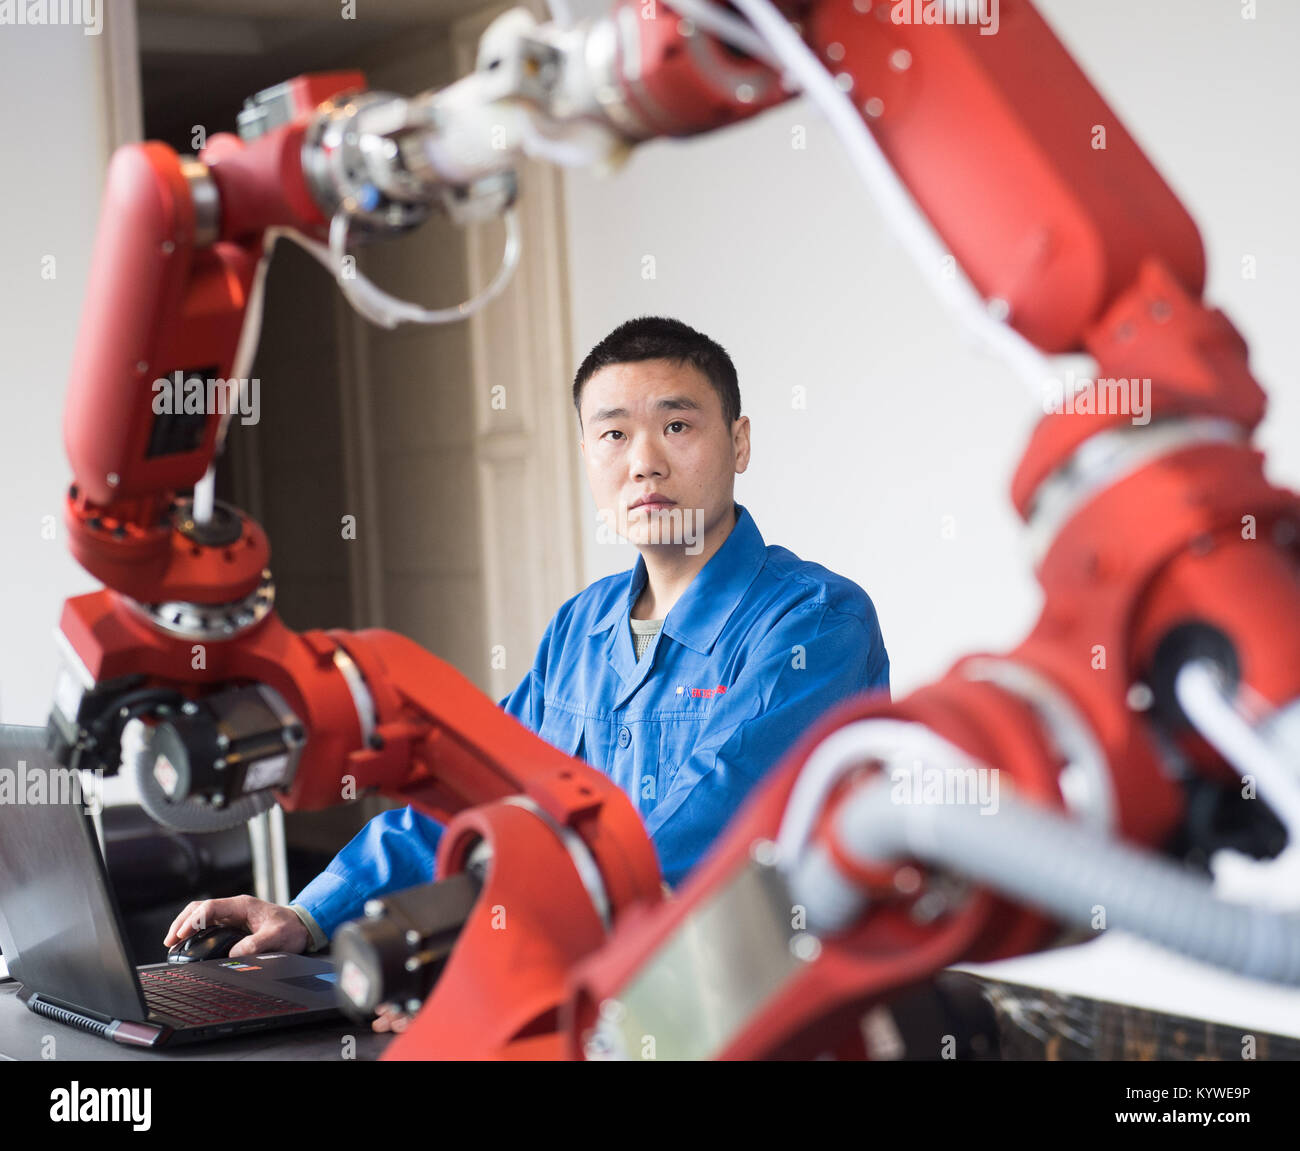 Rui'an, China's Zhejiang Province. 16th Jan, 2018. A technician from Rui'an Hsoar Group debugs a robot in Rui'an City, east China's Zhejiang Province, Jan. 16, 2018. Over 30 enterprises in Rui'an City purchased more than 500 robots to boost productivity. Credit: Weng Xinyang/Xinhua/Alamy Live News Stock Photo